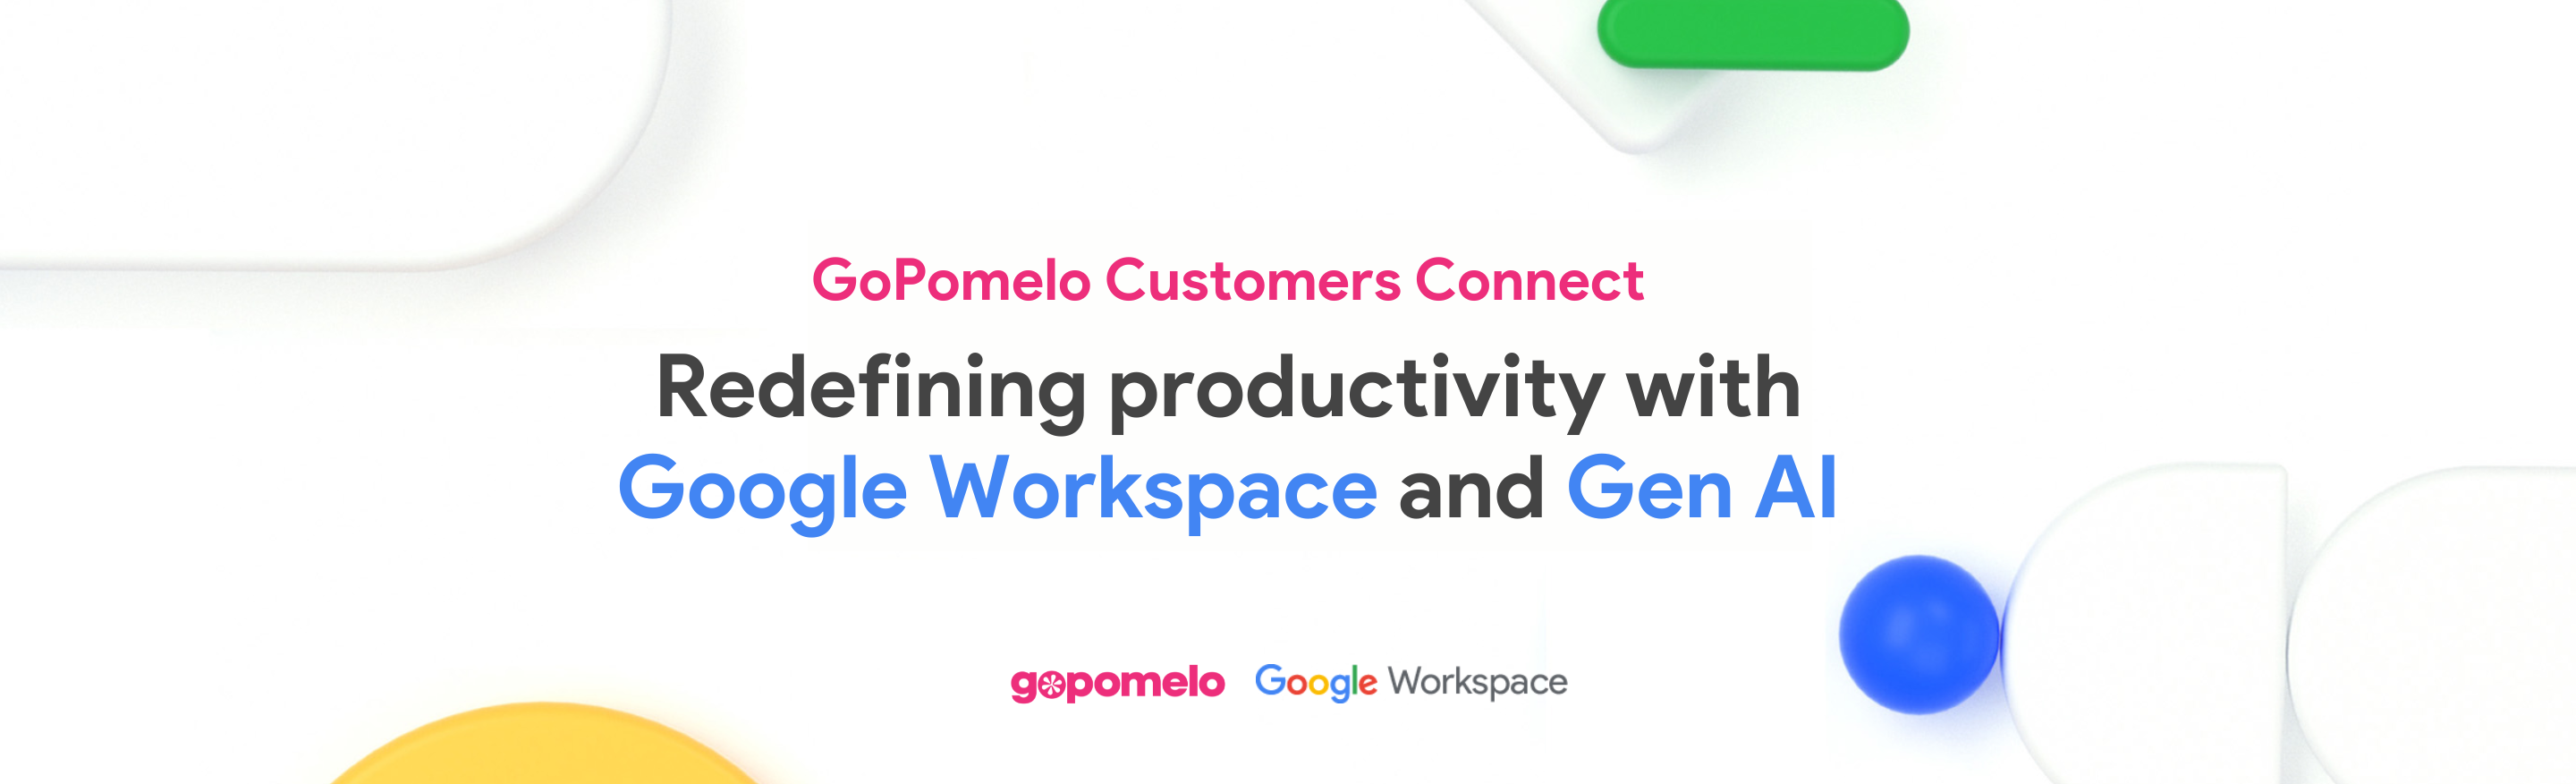 Redefining productivity with Google Workspace and Gen AI